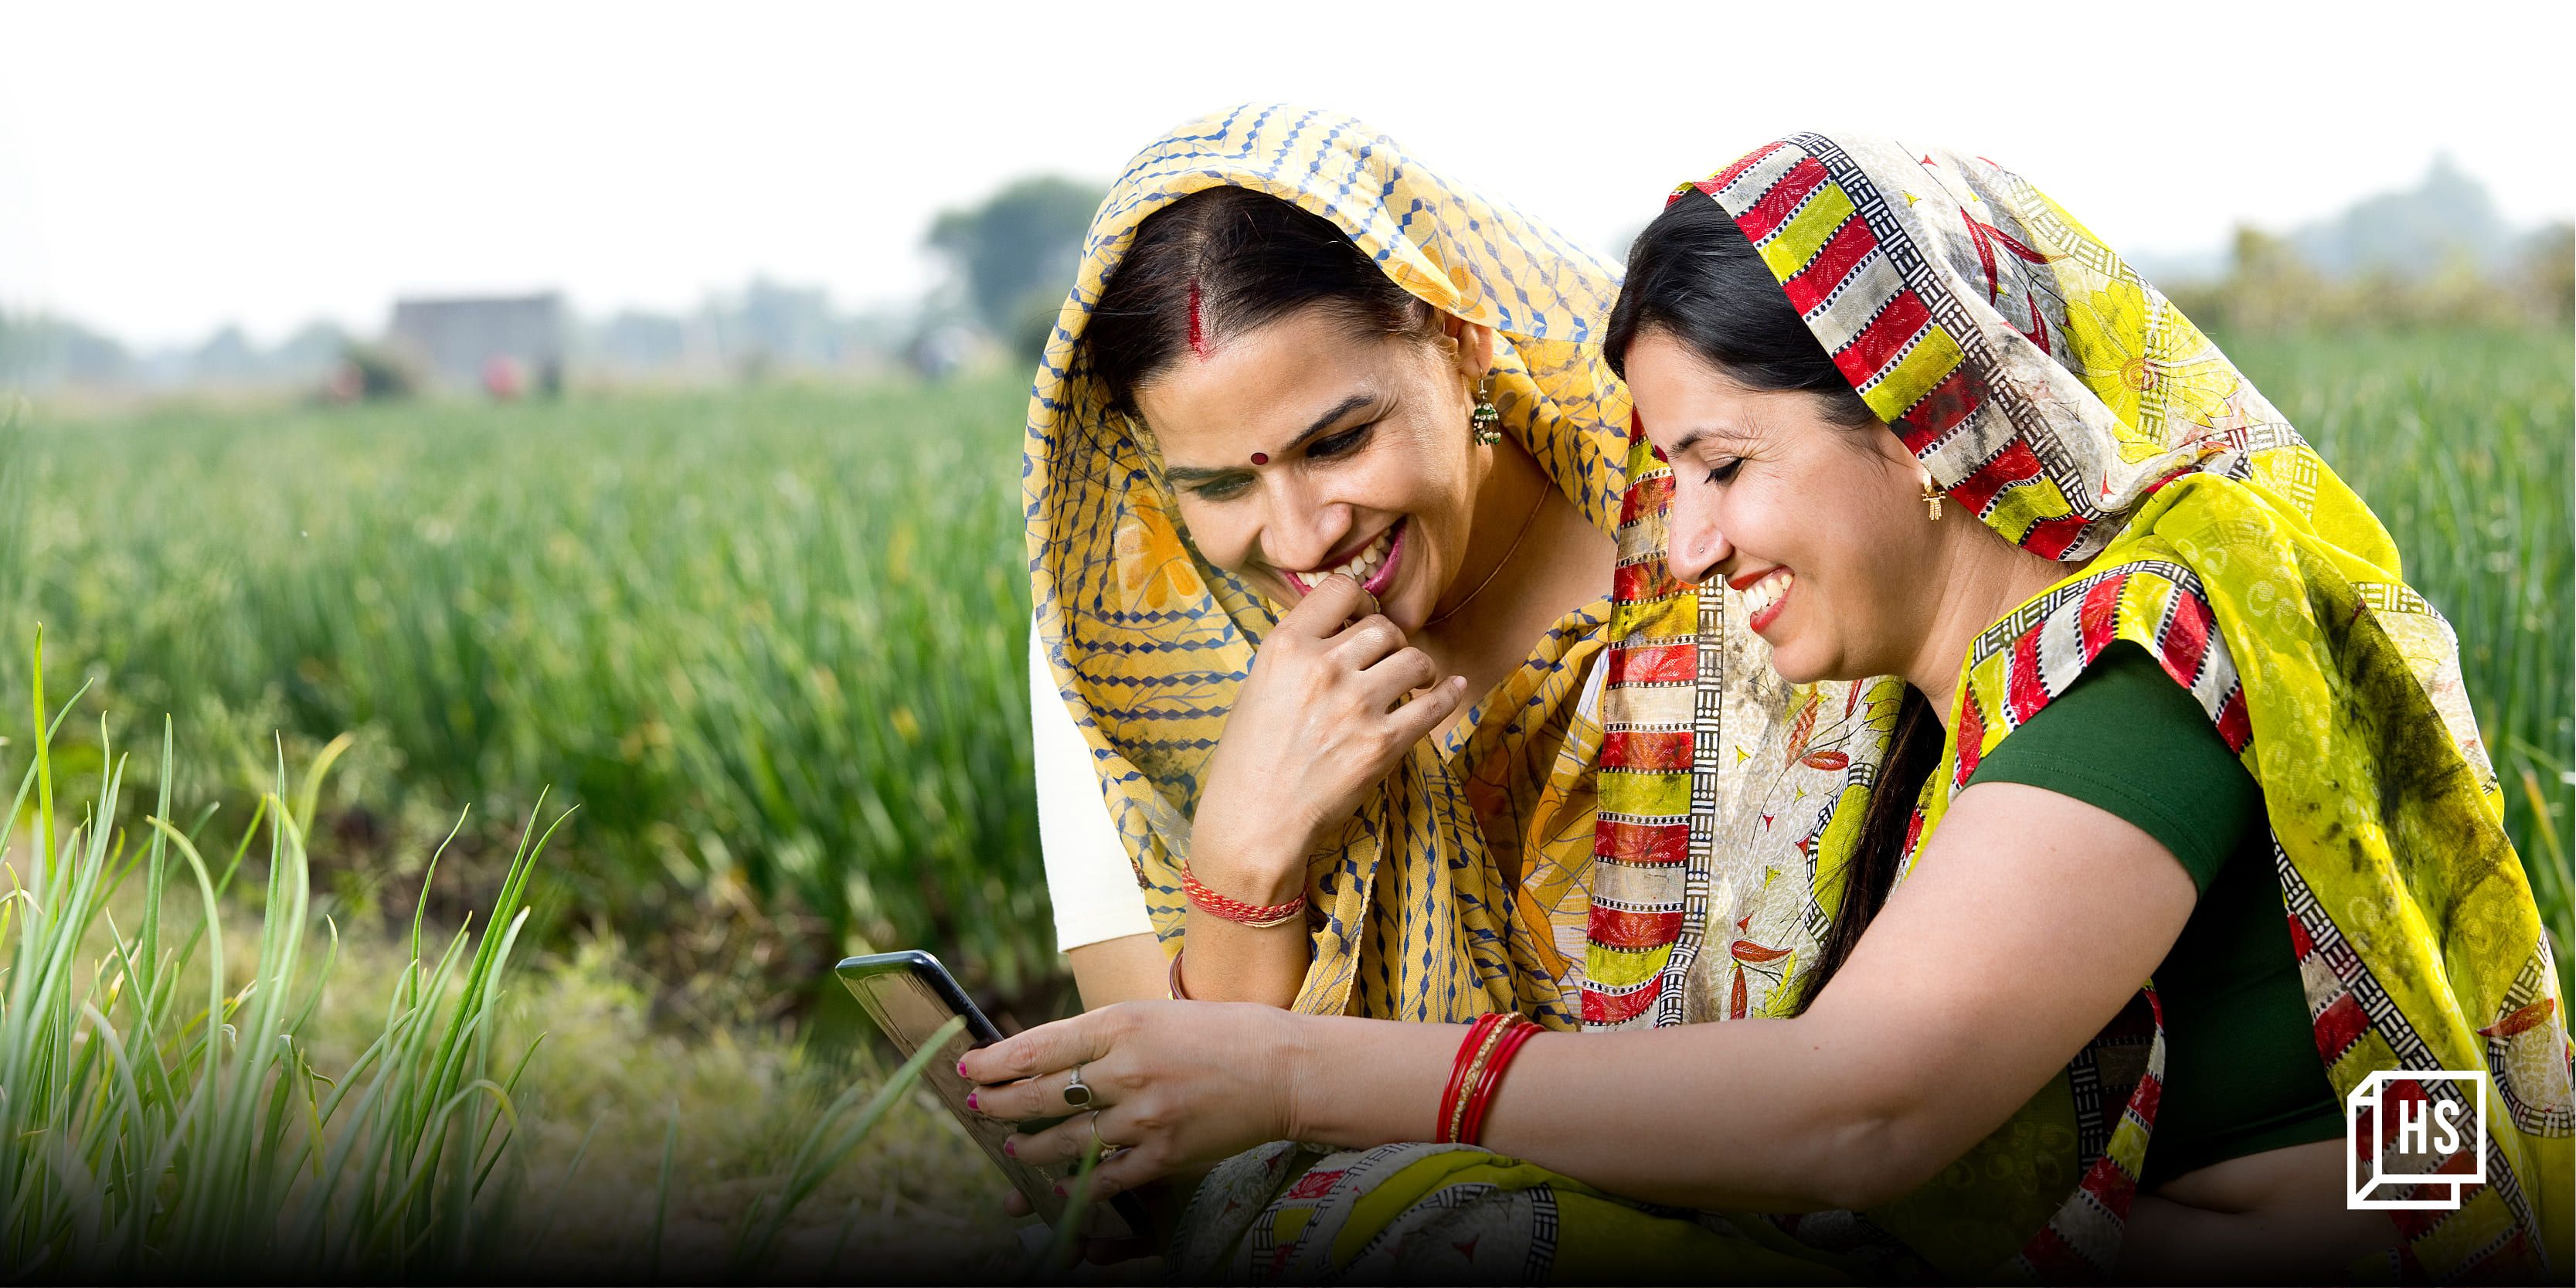 PayNearby launches Digital Naari platform to generate sustainable self-employment for women 



